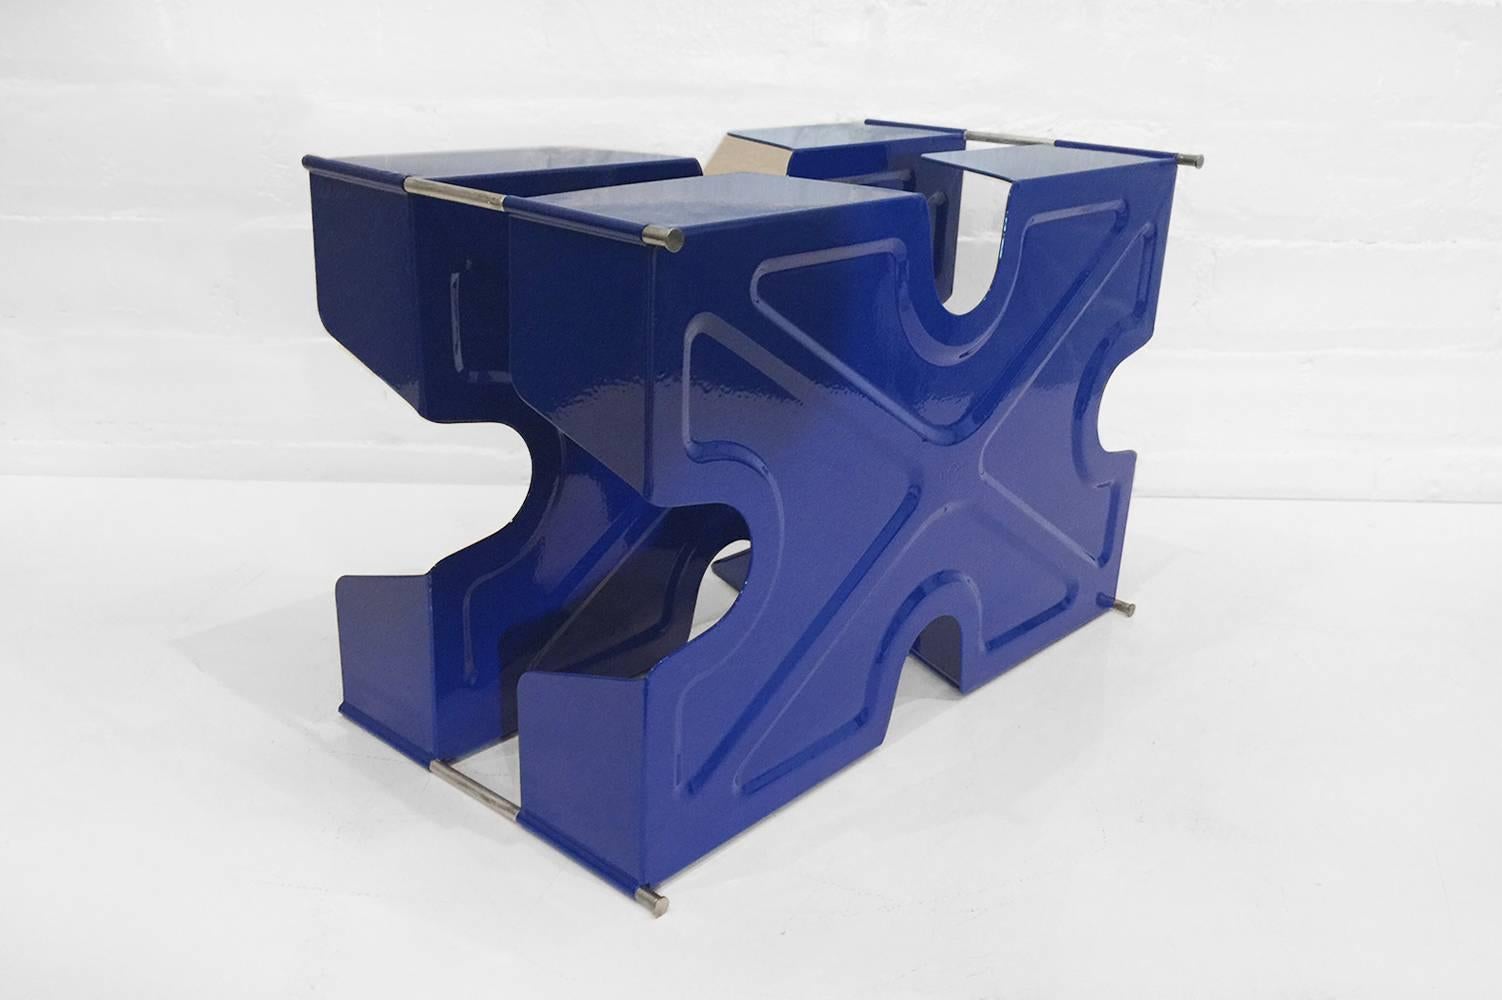 Machine Age 1920s Two-Tier Letter Tray, Royal Blue